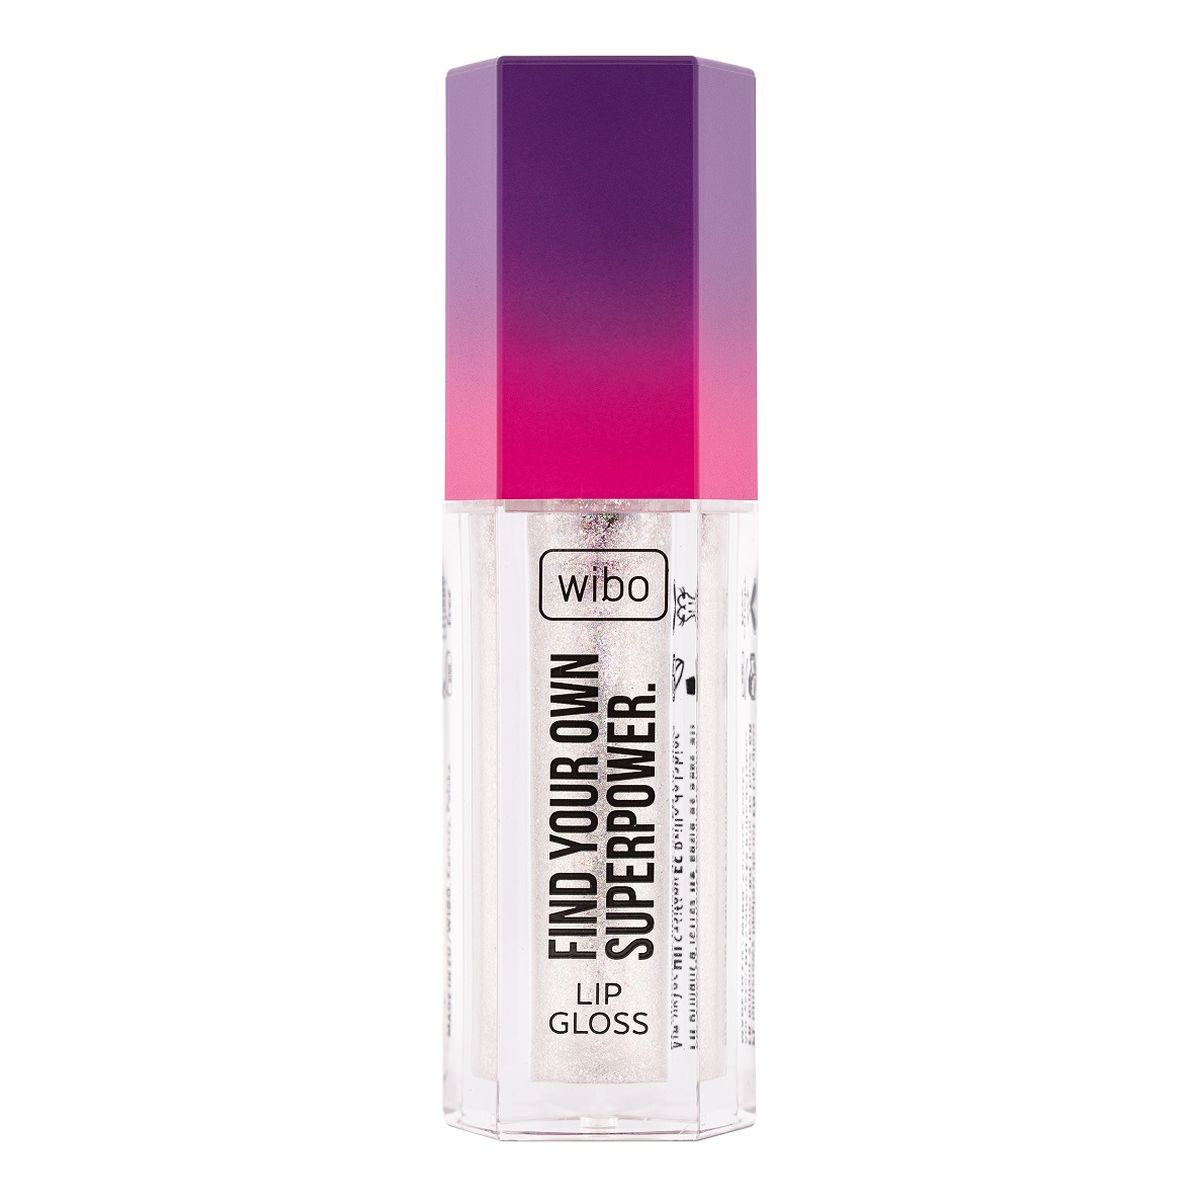 Wibo Find your own superpower lip gloss błyszczyk do ust 01 6g 6g